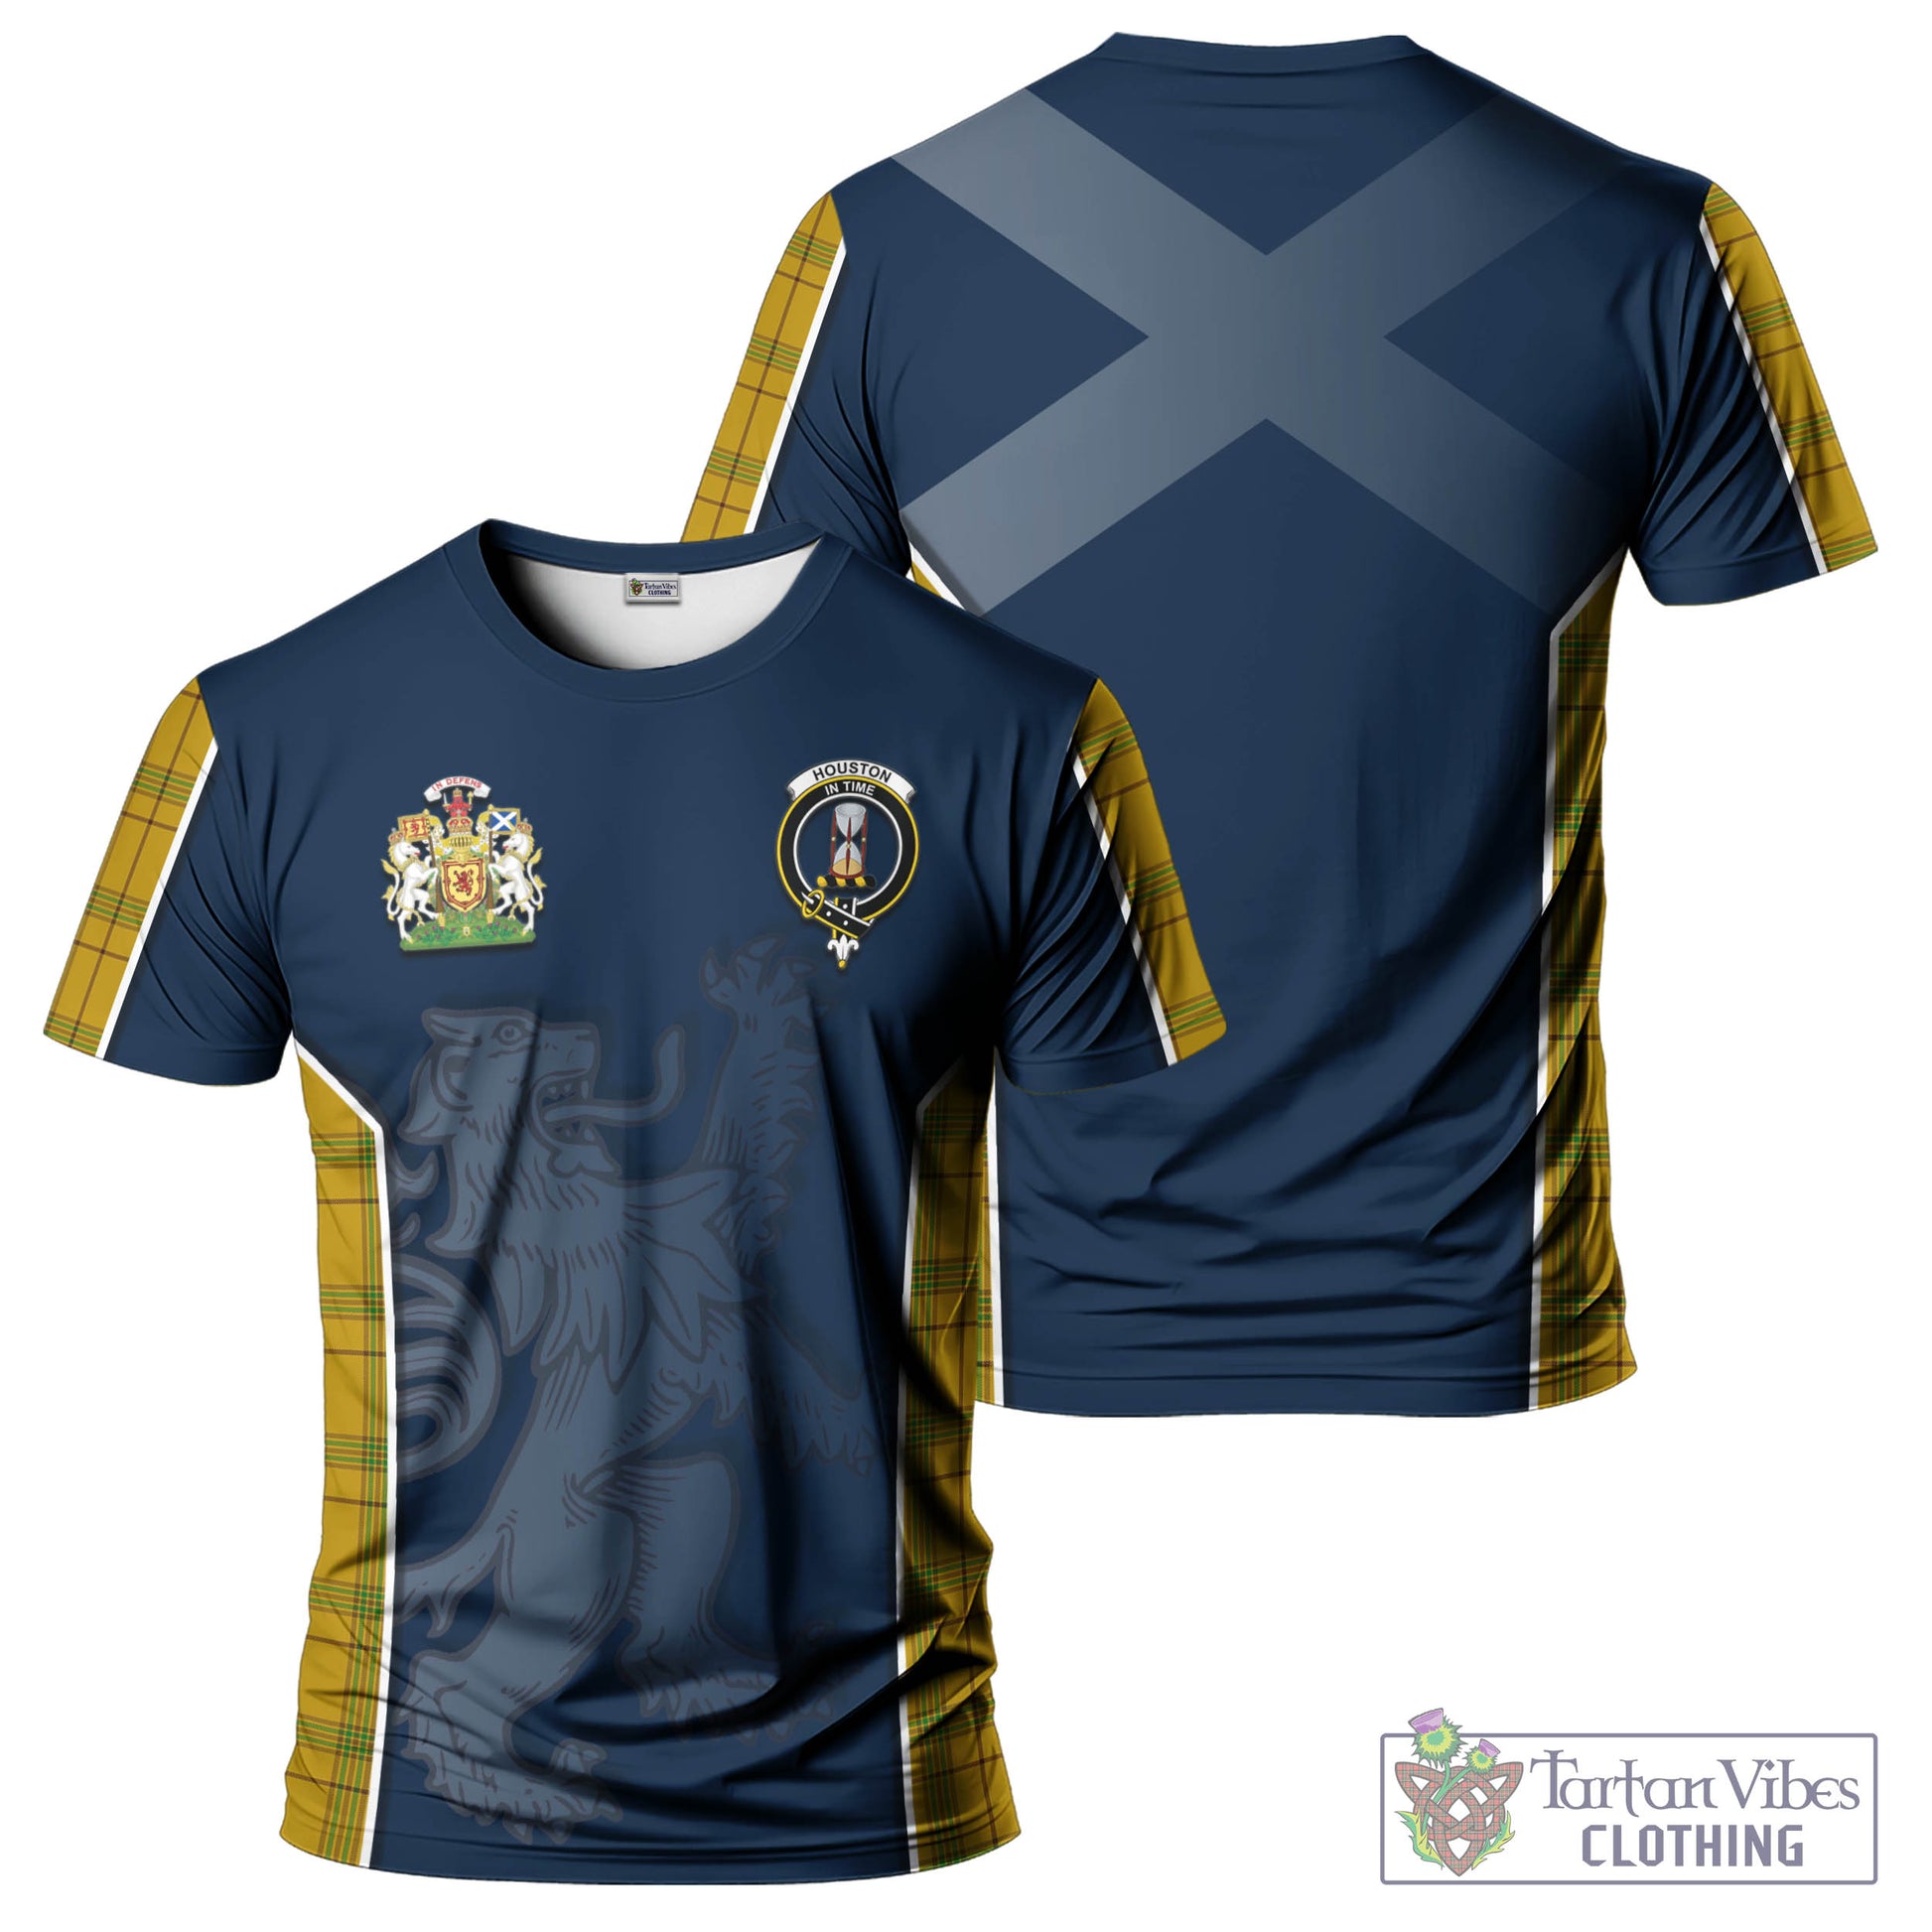 Tartan Vibes Clothing Houston Tartan T-Shirt with Family Crest and Lion Rampant Vibes Sport Style